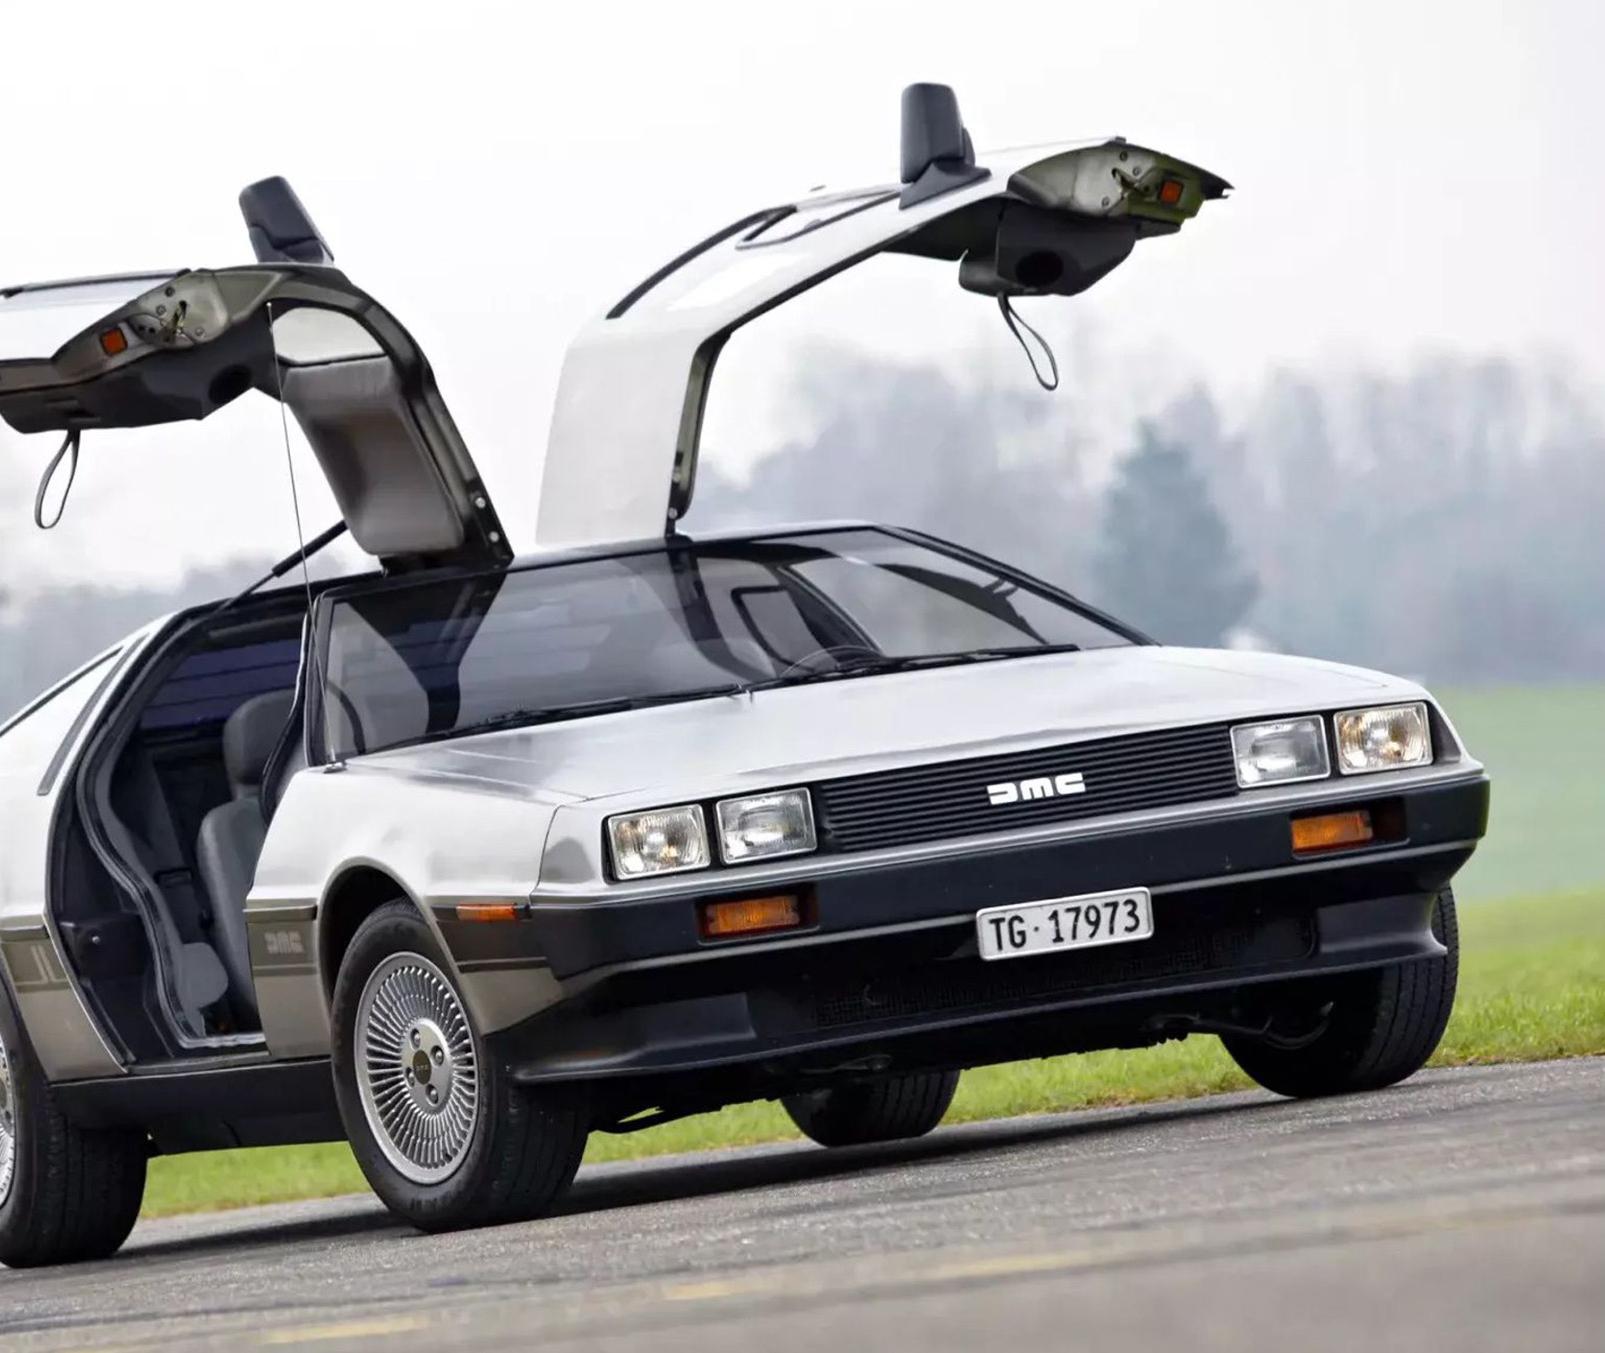 A silver DeLorean with its doors raised up, a misty green forest in the background